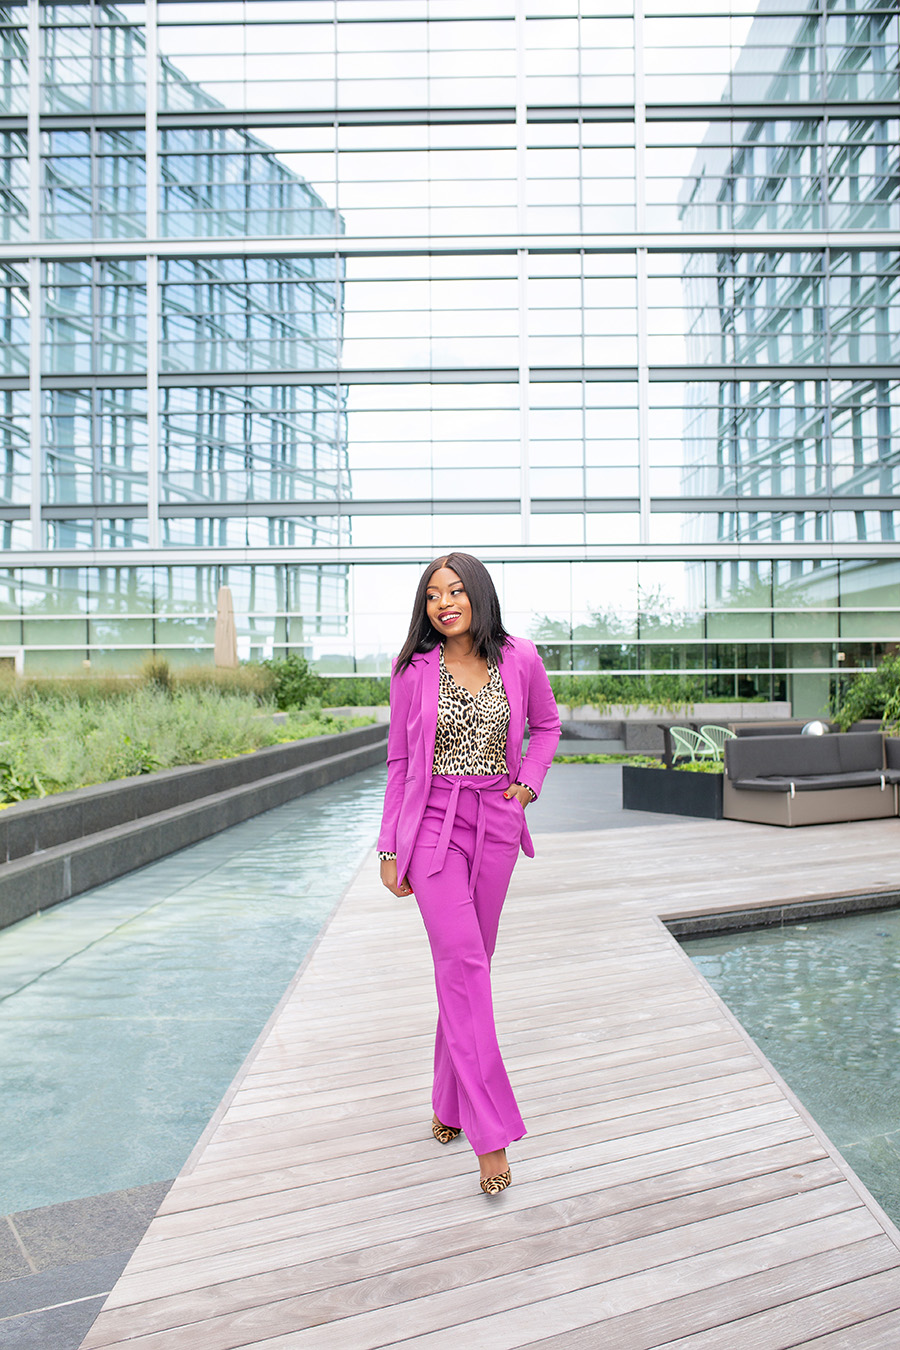 Stella-adewunmi-of-jadore-fashion-shares-how-to-wear-bold-color-suit-for-fall